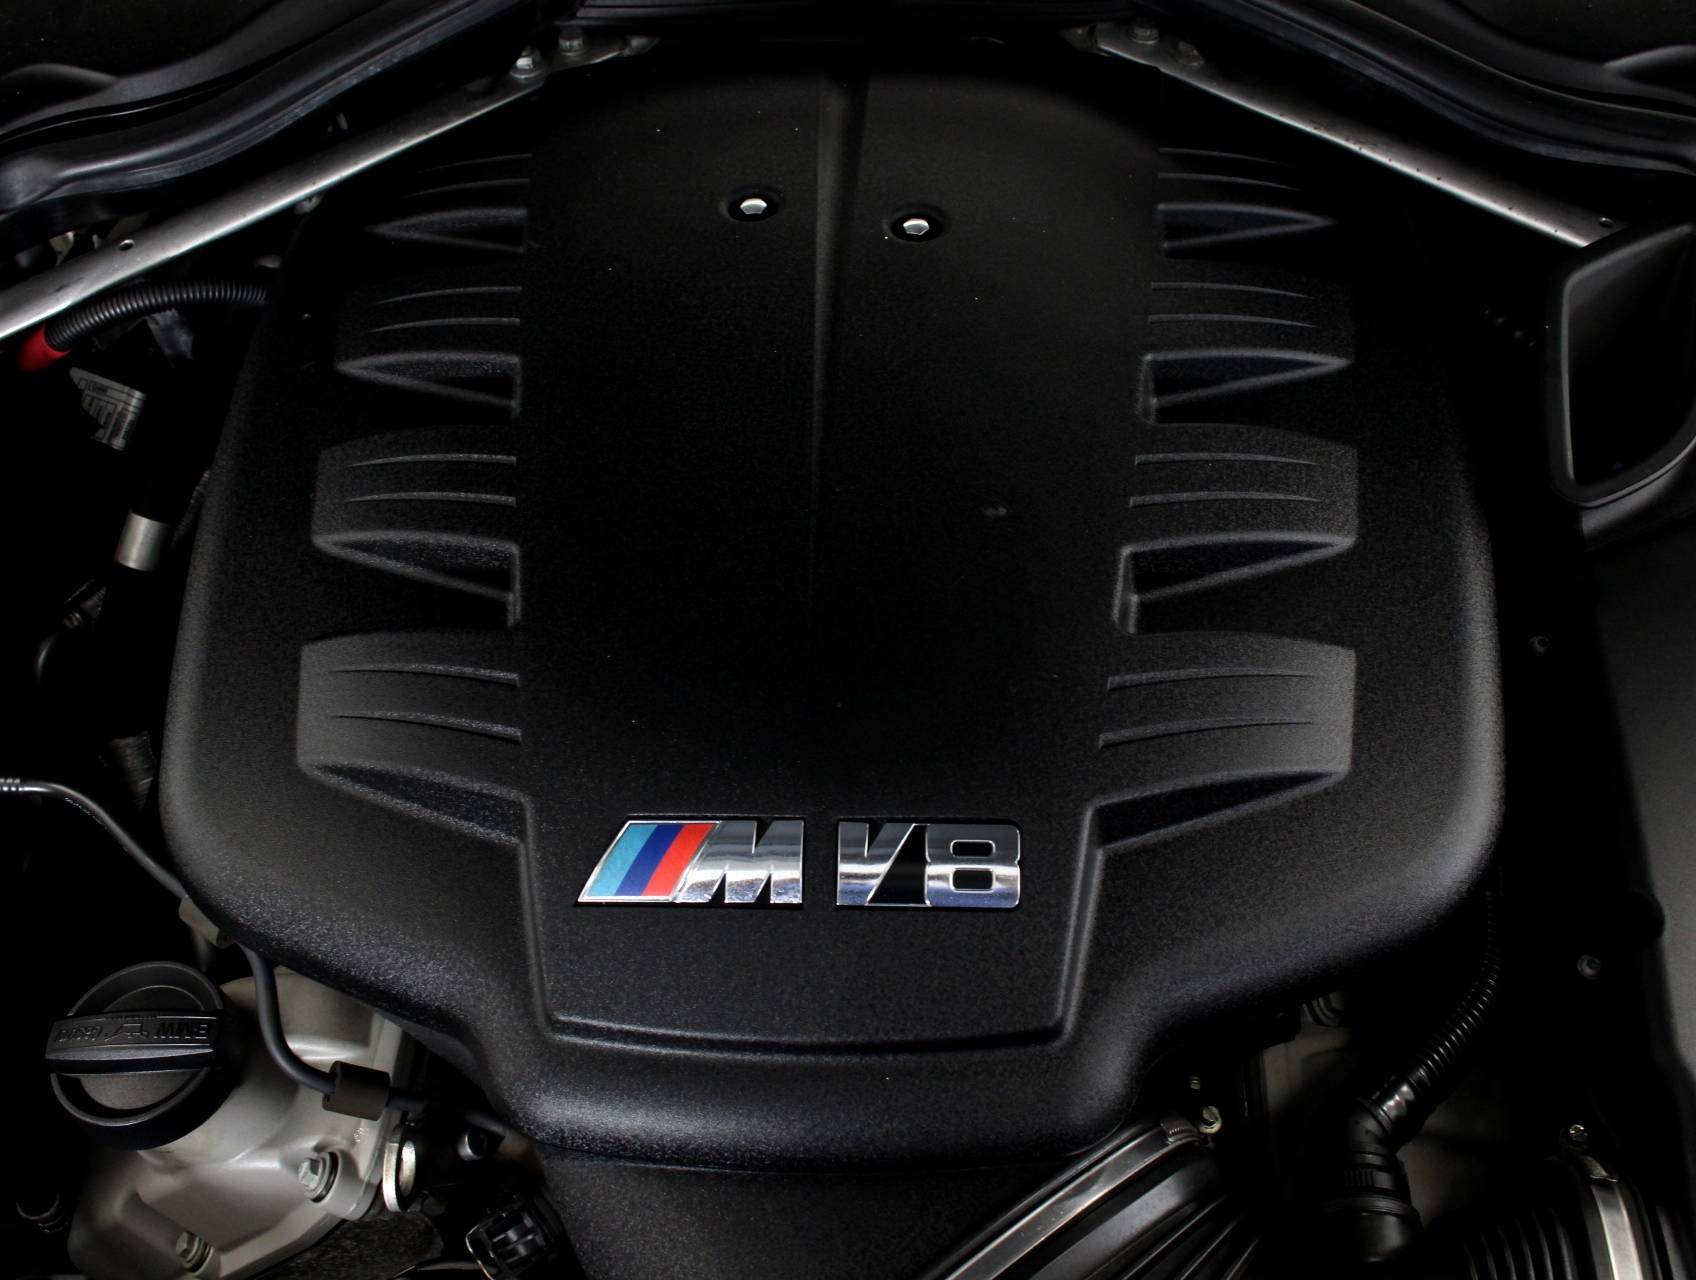 Florida Fine Cars - Used BMW M3 2013 WEST PALM COMPETITION PACKAGE